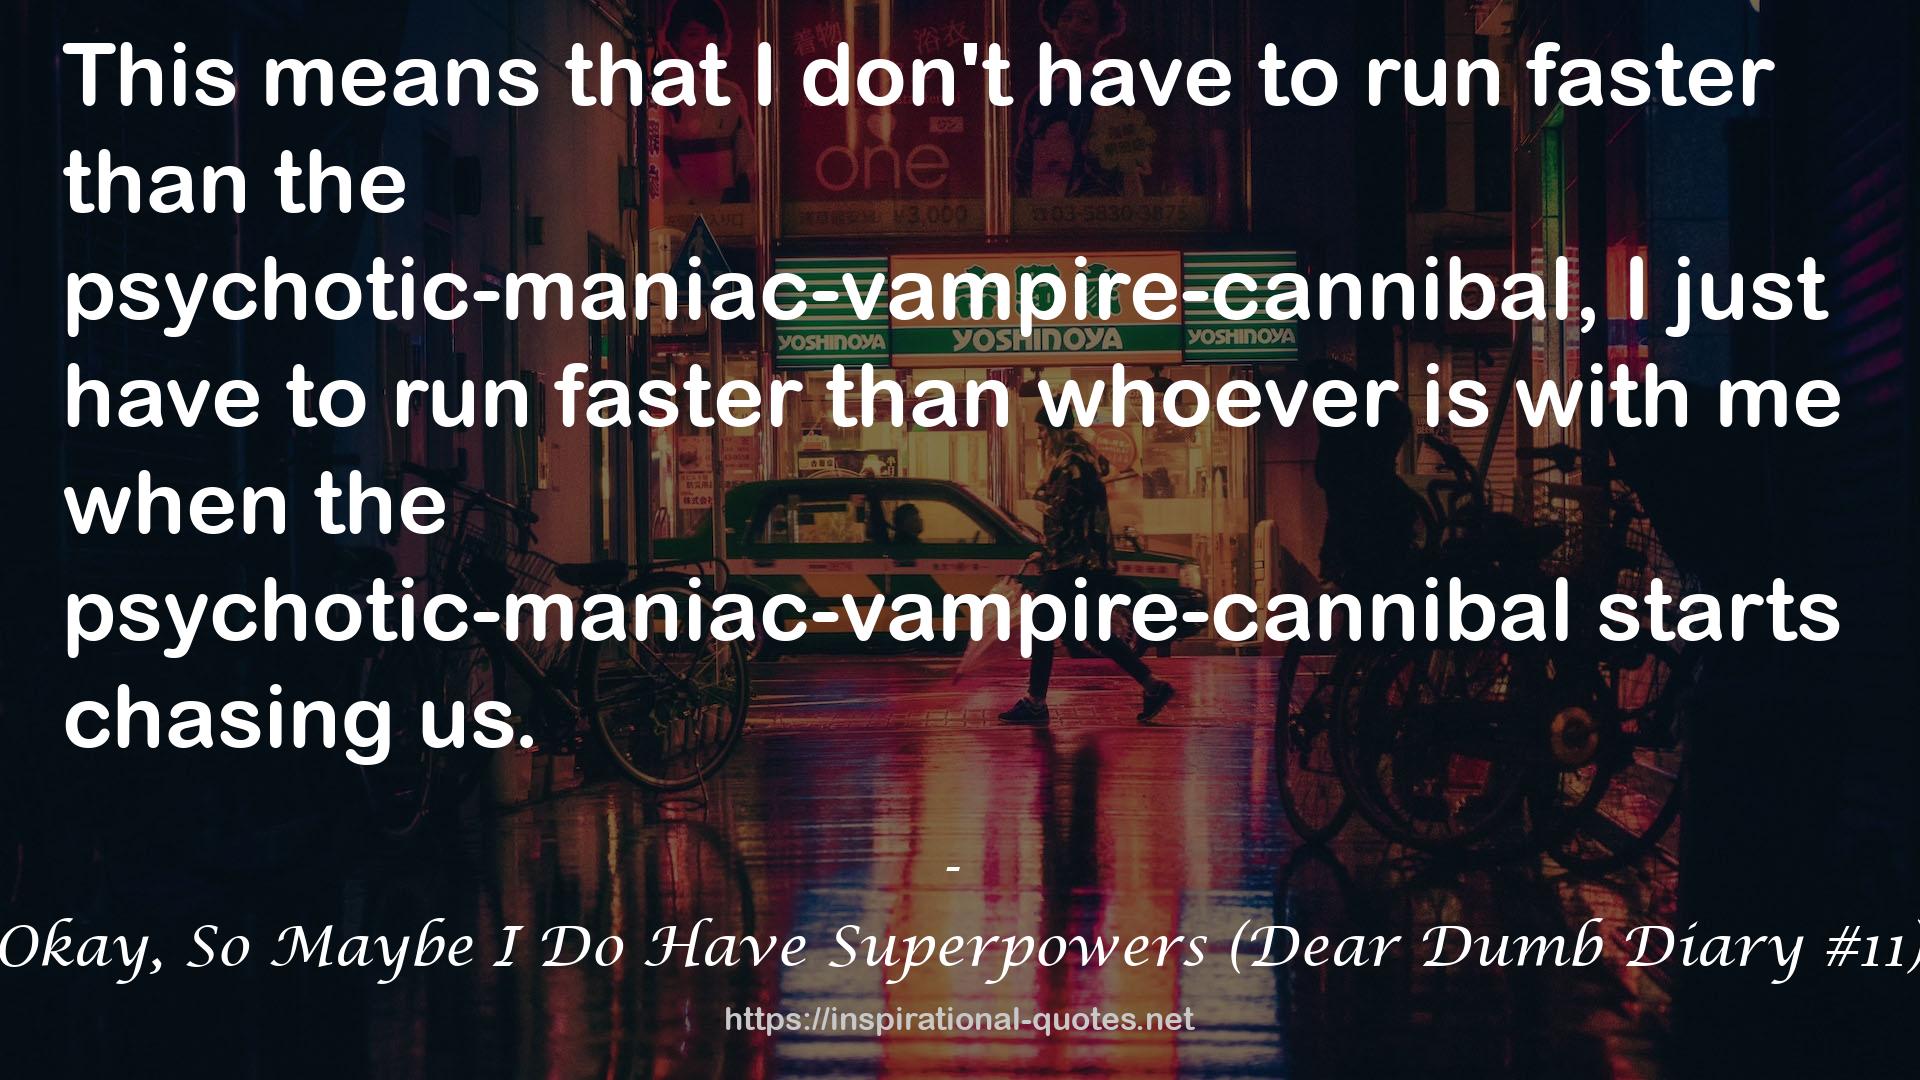 Okay, So Maybe I Do Have Superpowers (Dear Dumb Diary #11) QUOTES